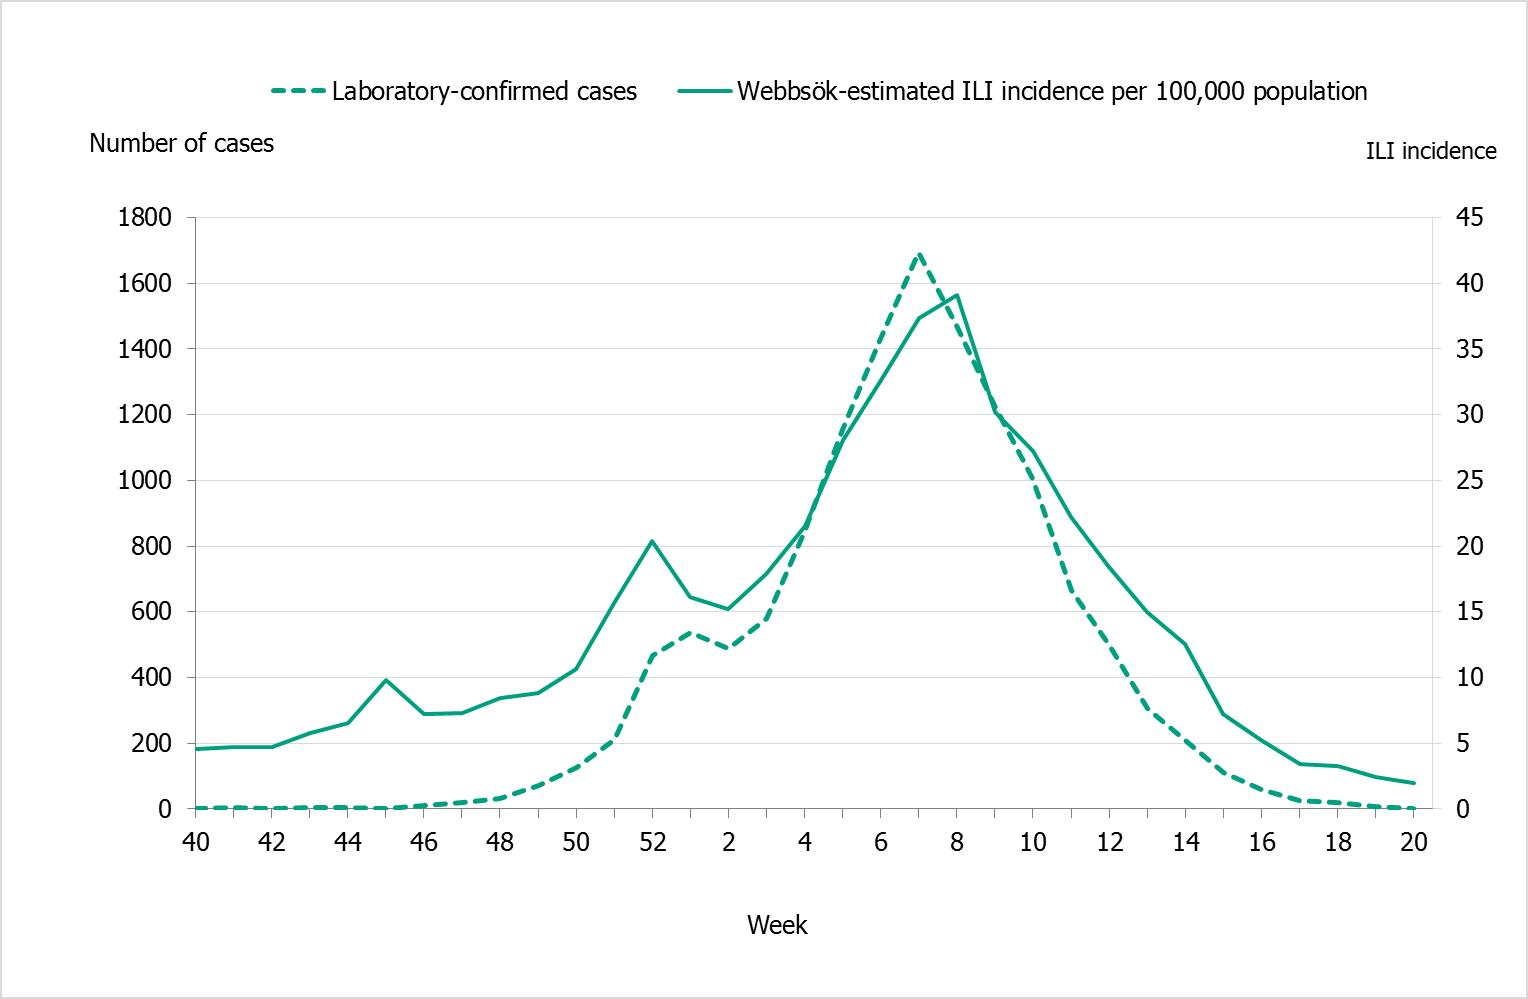 Webbsök’s estimated proportion of persons with ILI and the number of laboratory-confirmed cases, 2017–2018. The two lines show a similar pattern although the highest value for Webbsök comes one week after the peak in lab-cases. 